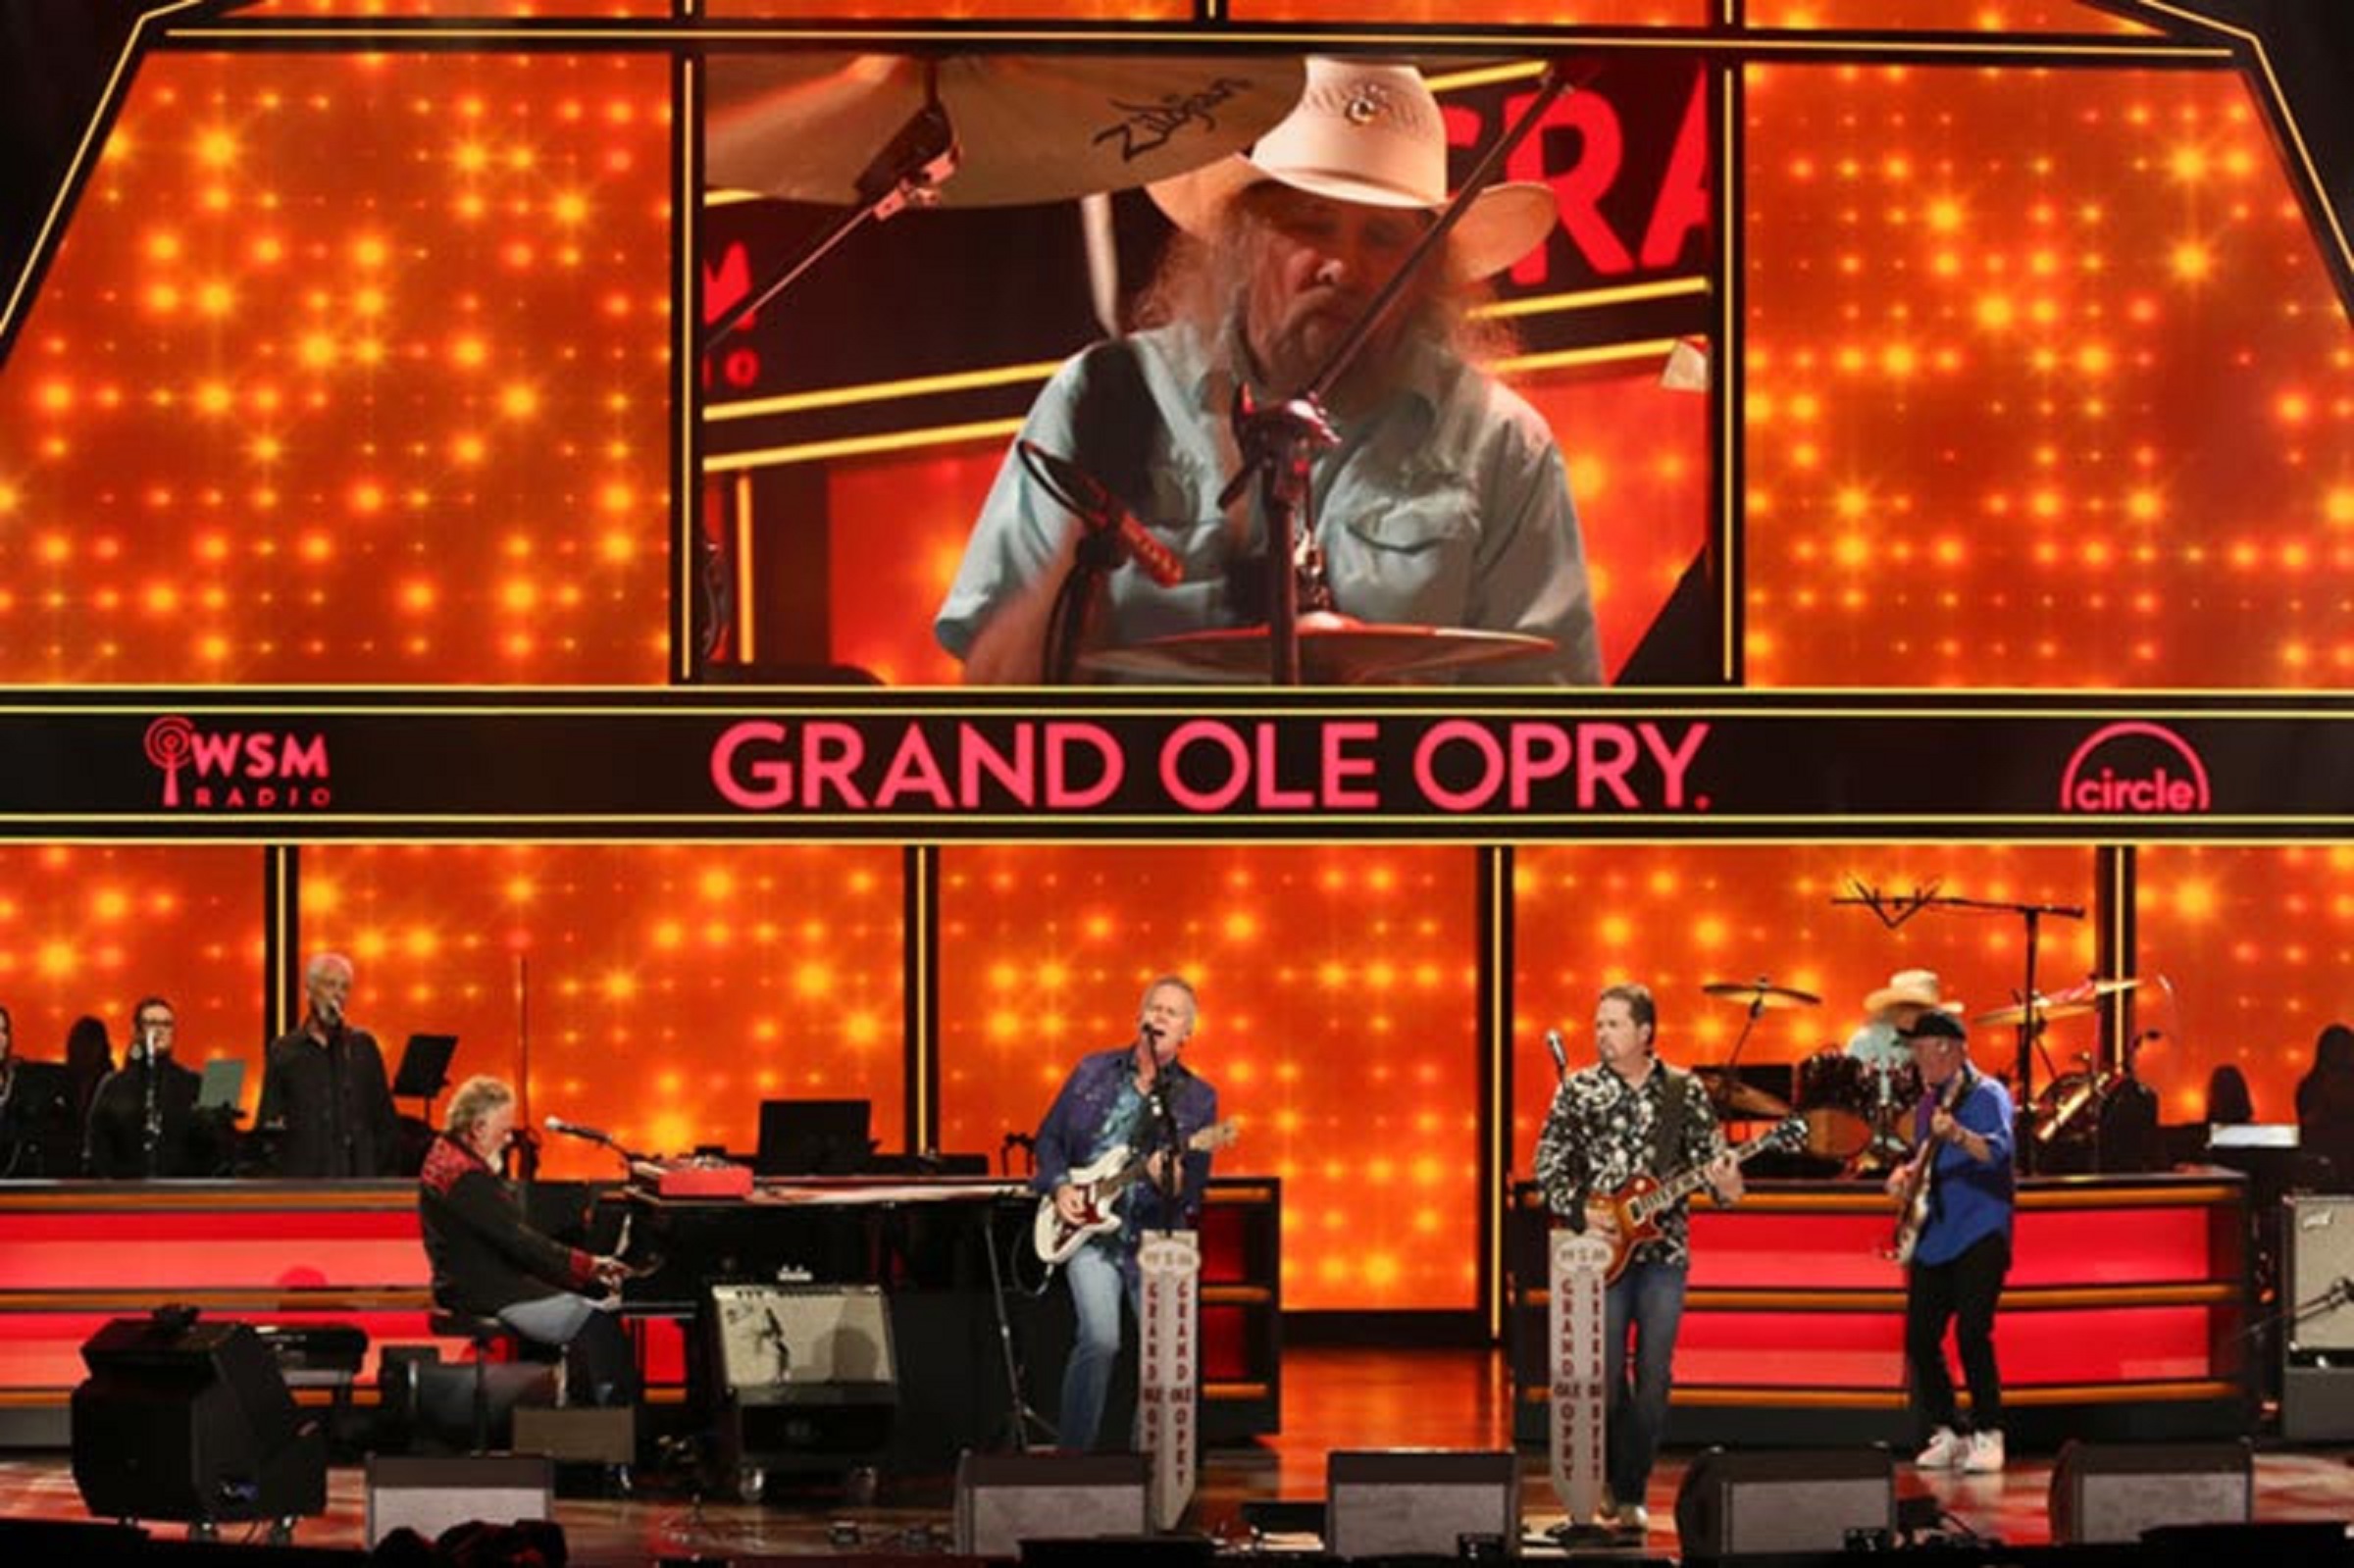 Lynyrd Skynyrd Drummer Artimus Pyle Makes Grand Ole Opry Debut Coinciding with "Sweet Home Alabama" Release